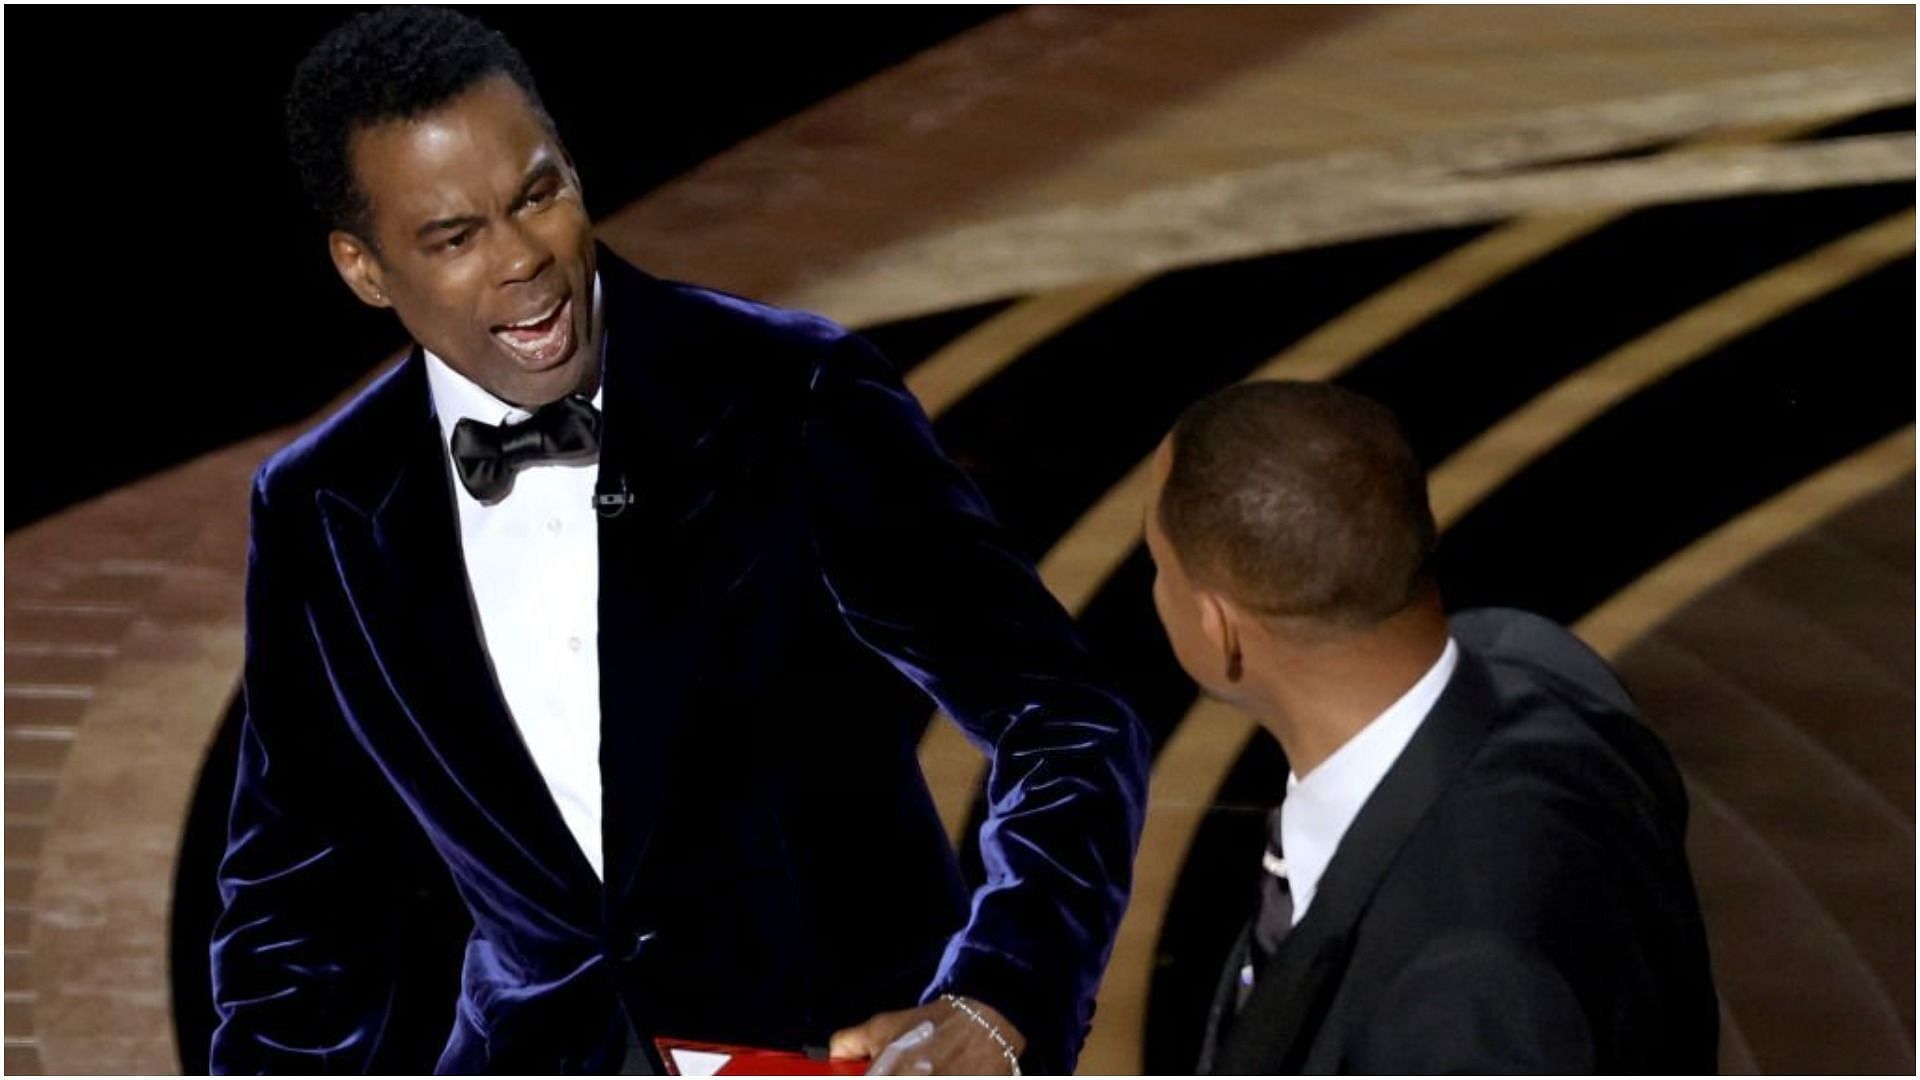 Will Smith slapped Chris Rock at the 94th Academy Awards (Image via Neilson Barnard/Getty Images)